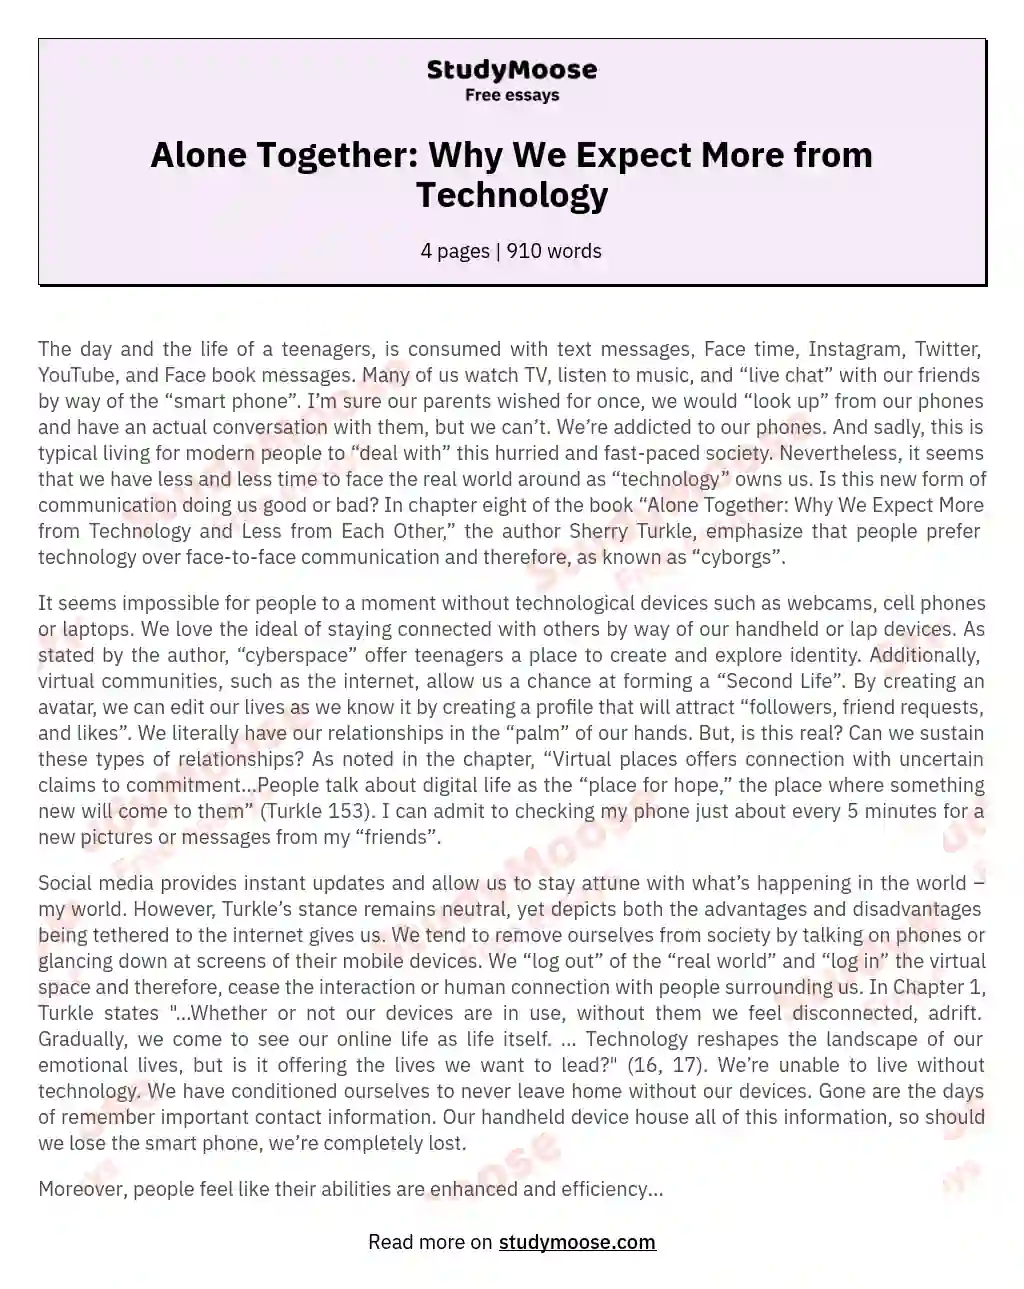 Alone Together: Why We Expect More from Technology essay